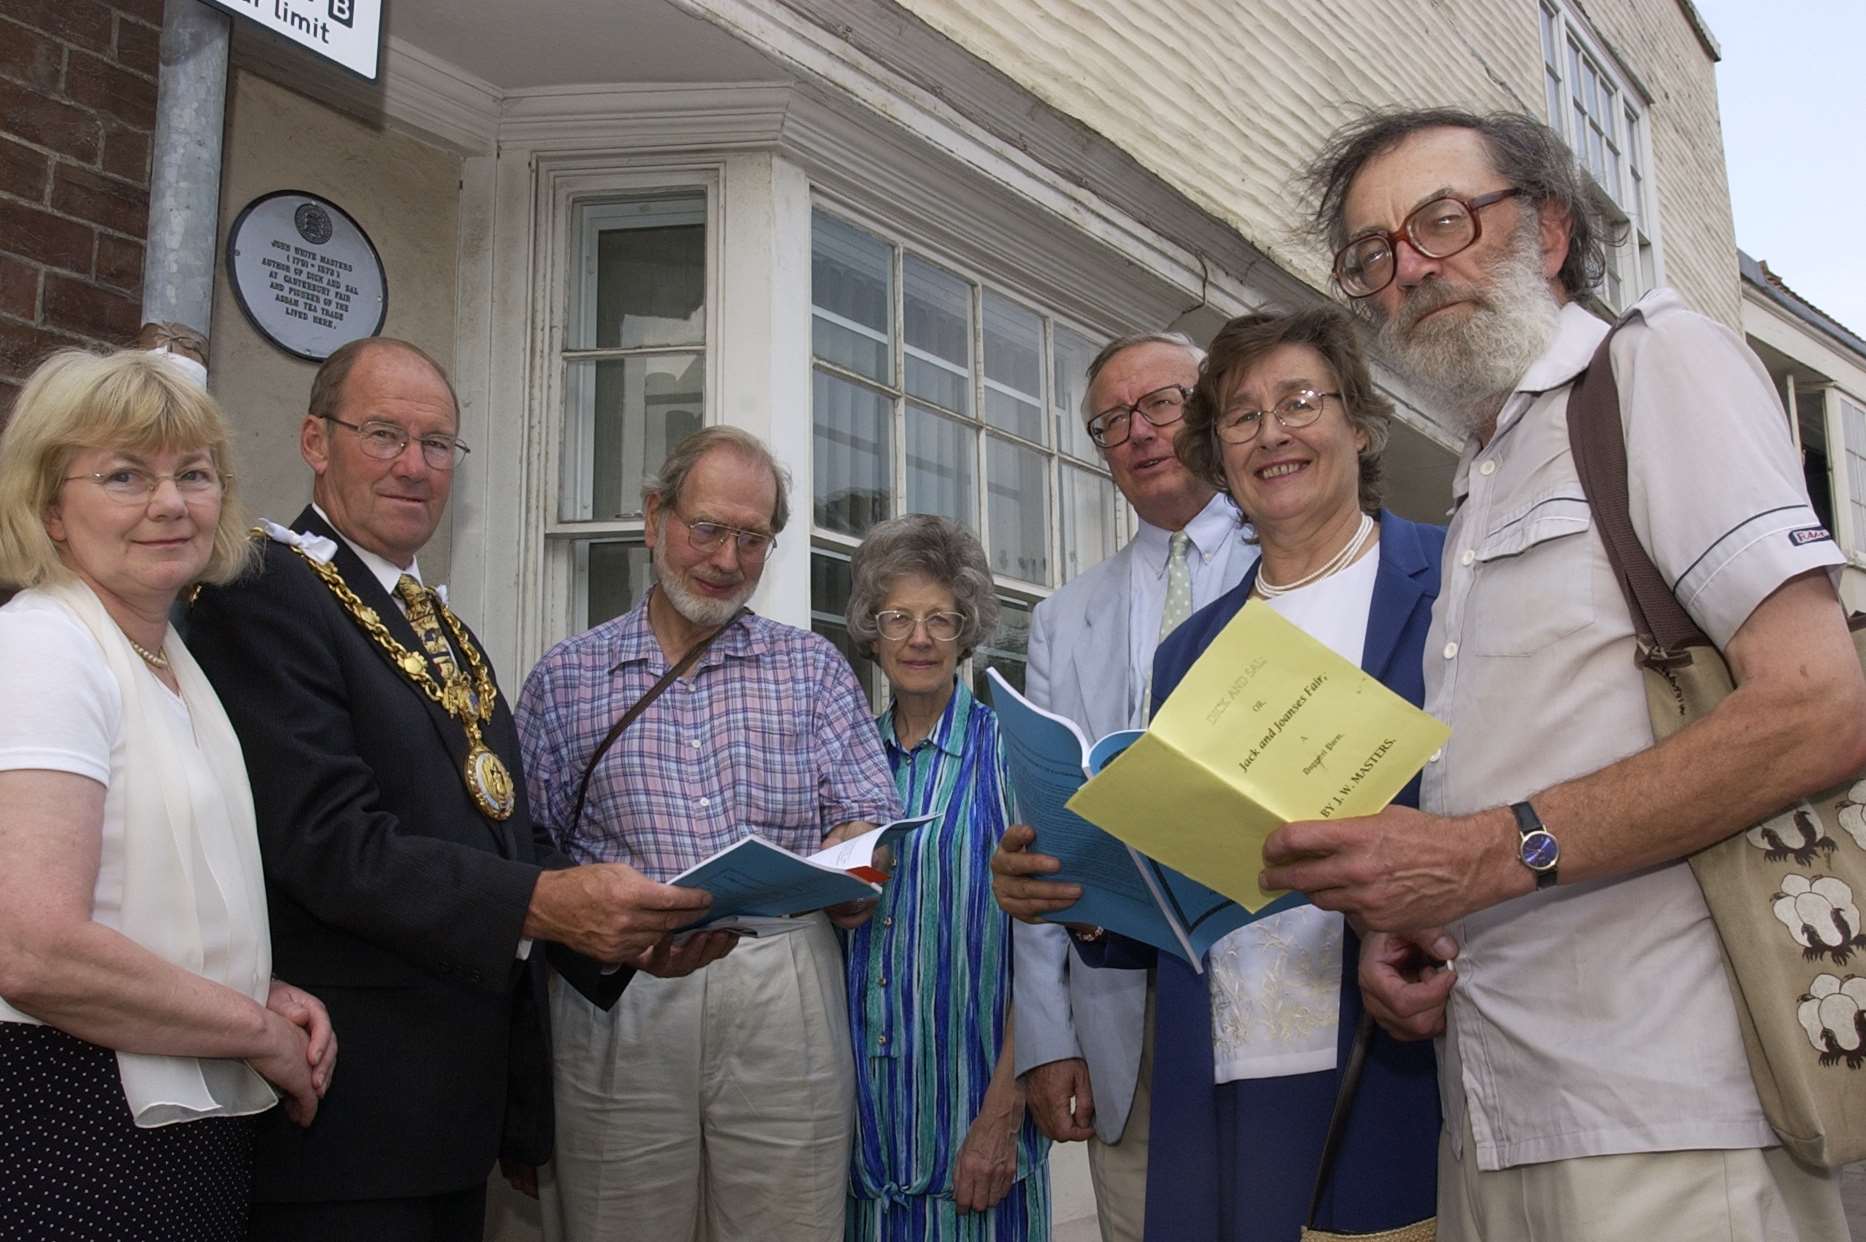 Arthur with the former mayor, mayoress and others, unveiling of a plaque in Court Street in 2002